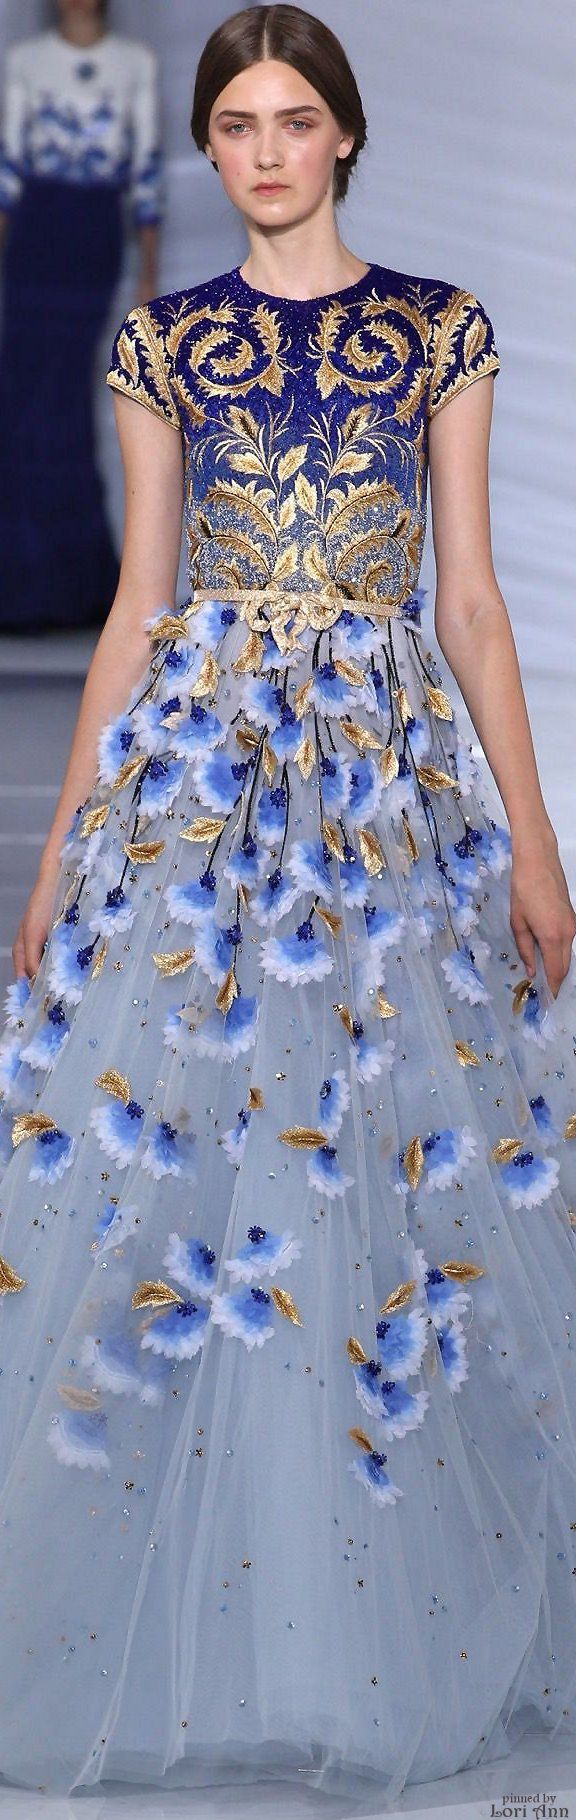 Georges Hobeika Couture Fall 2015. Jaglady